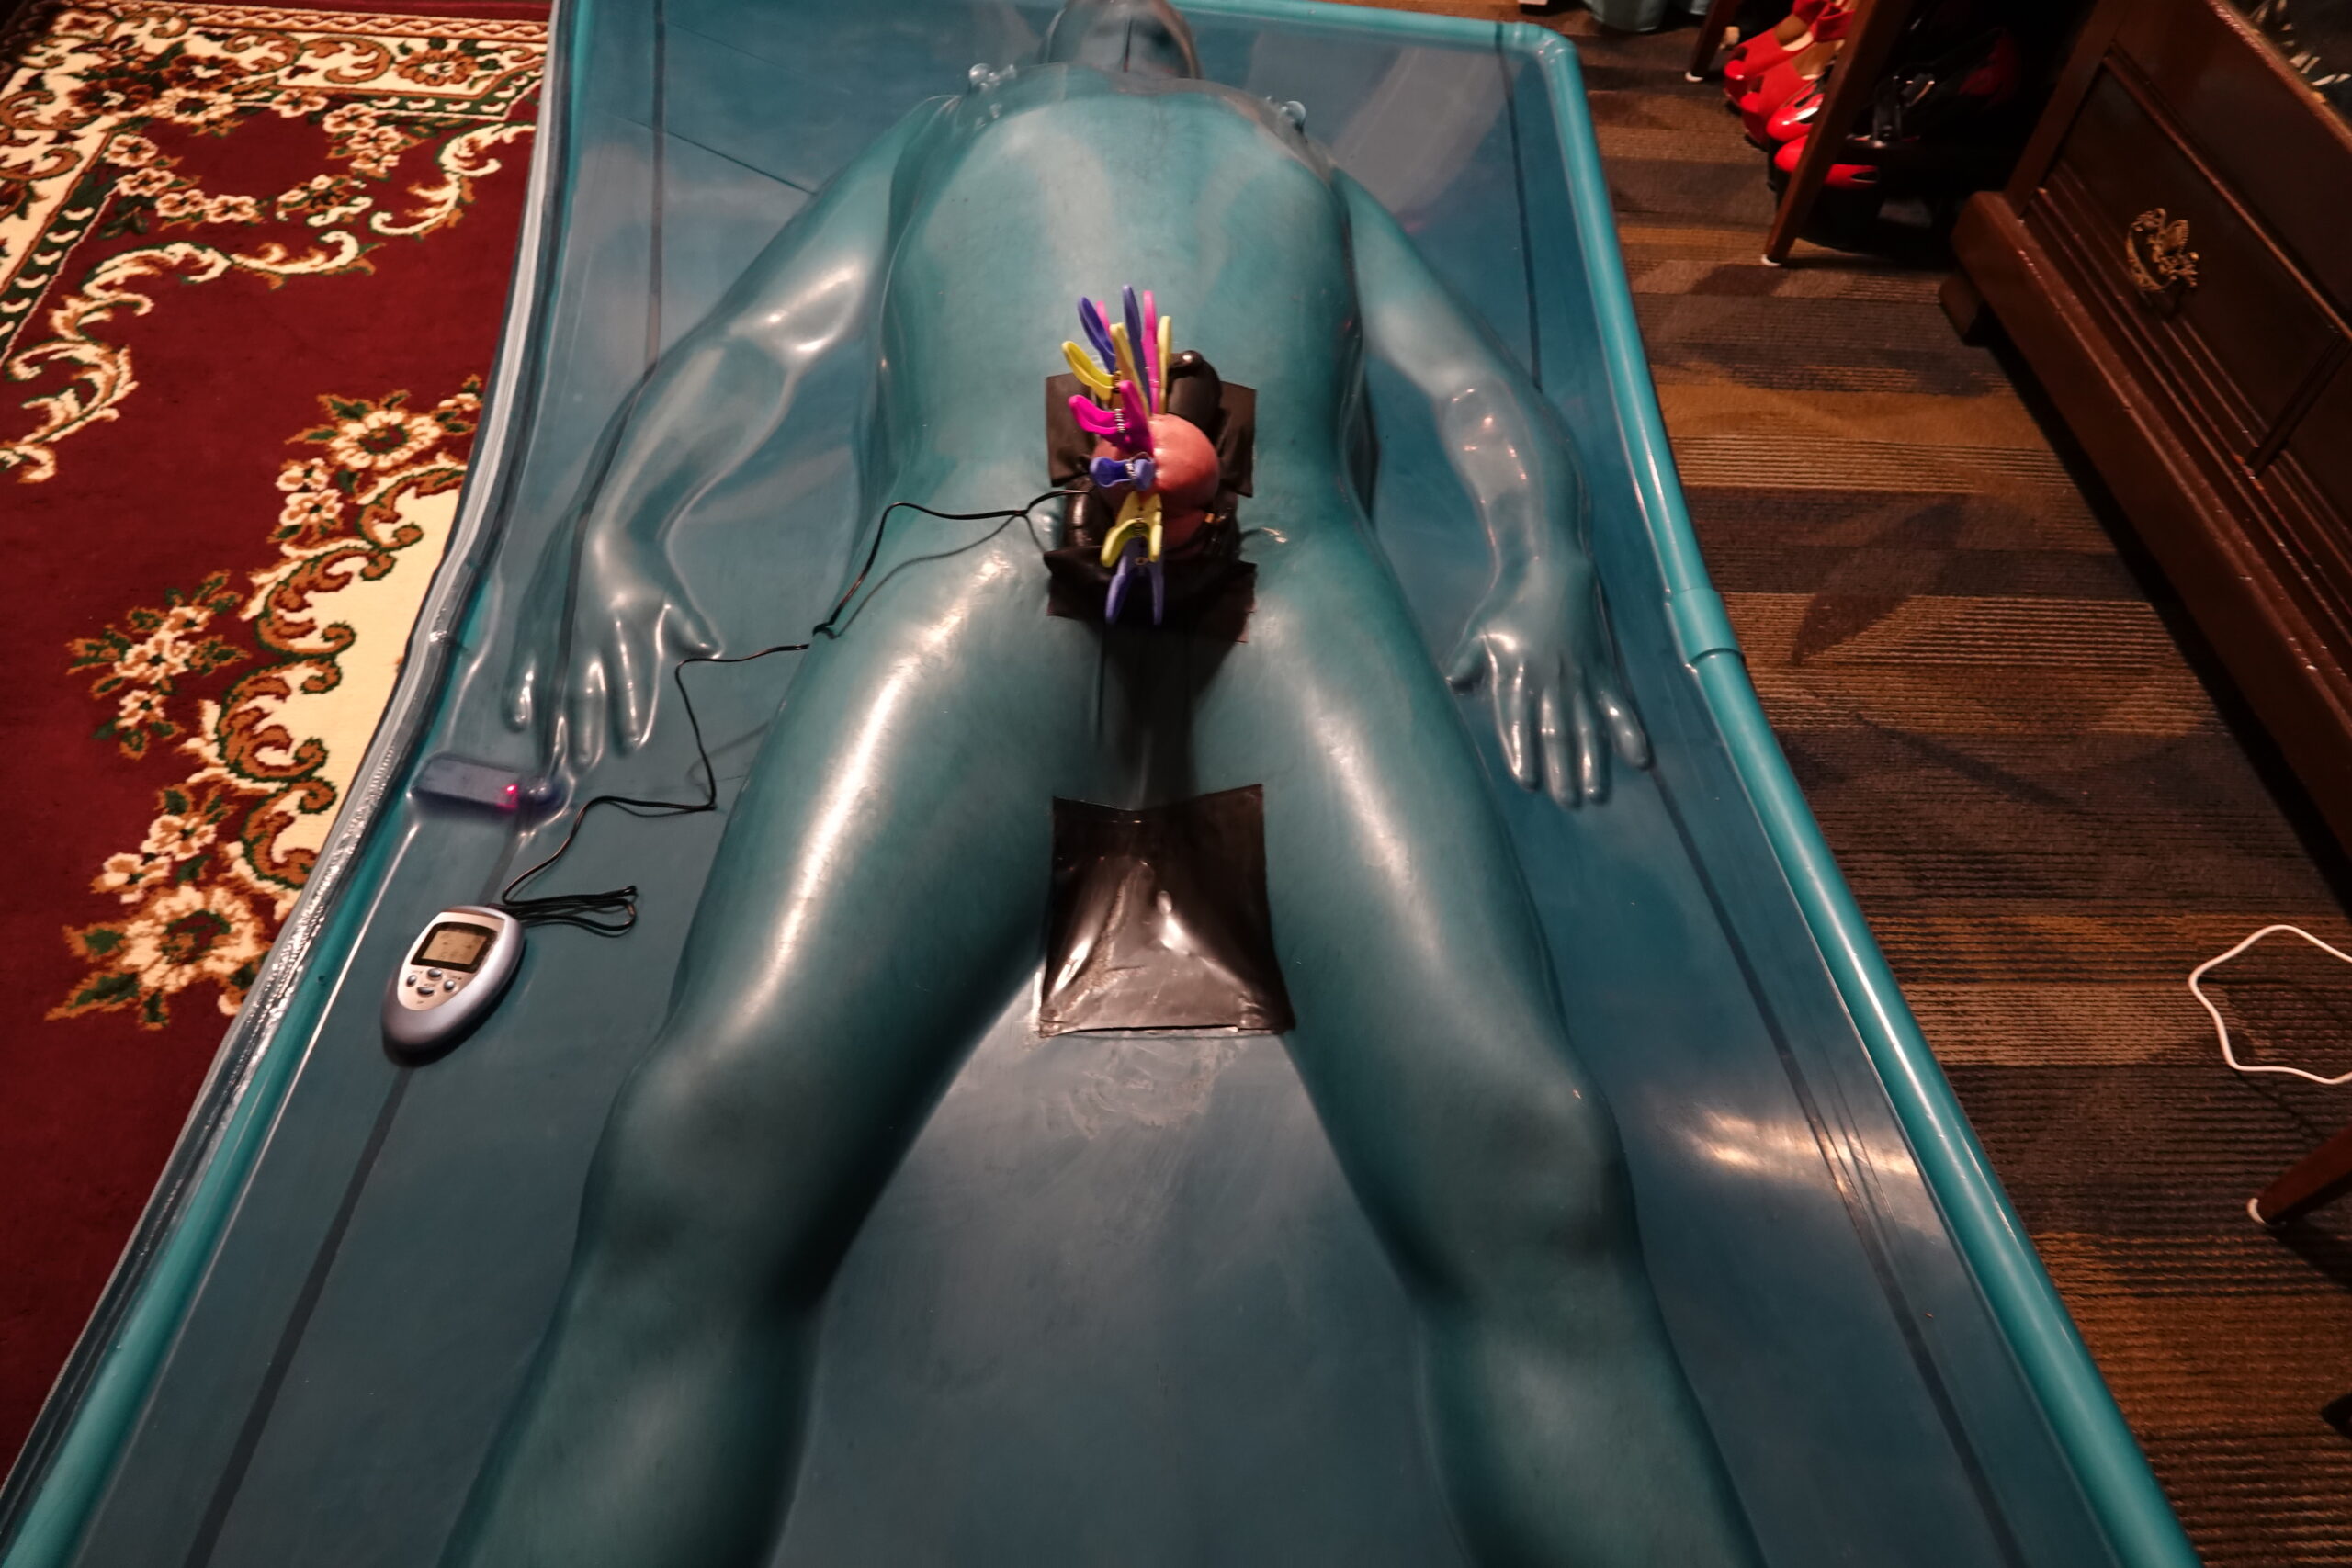 Cbt in The Latex Vac Bed